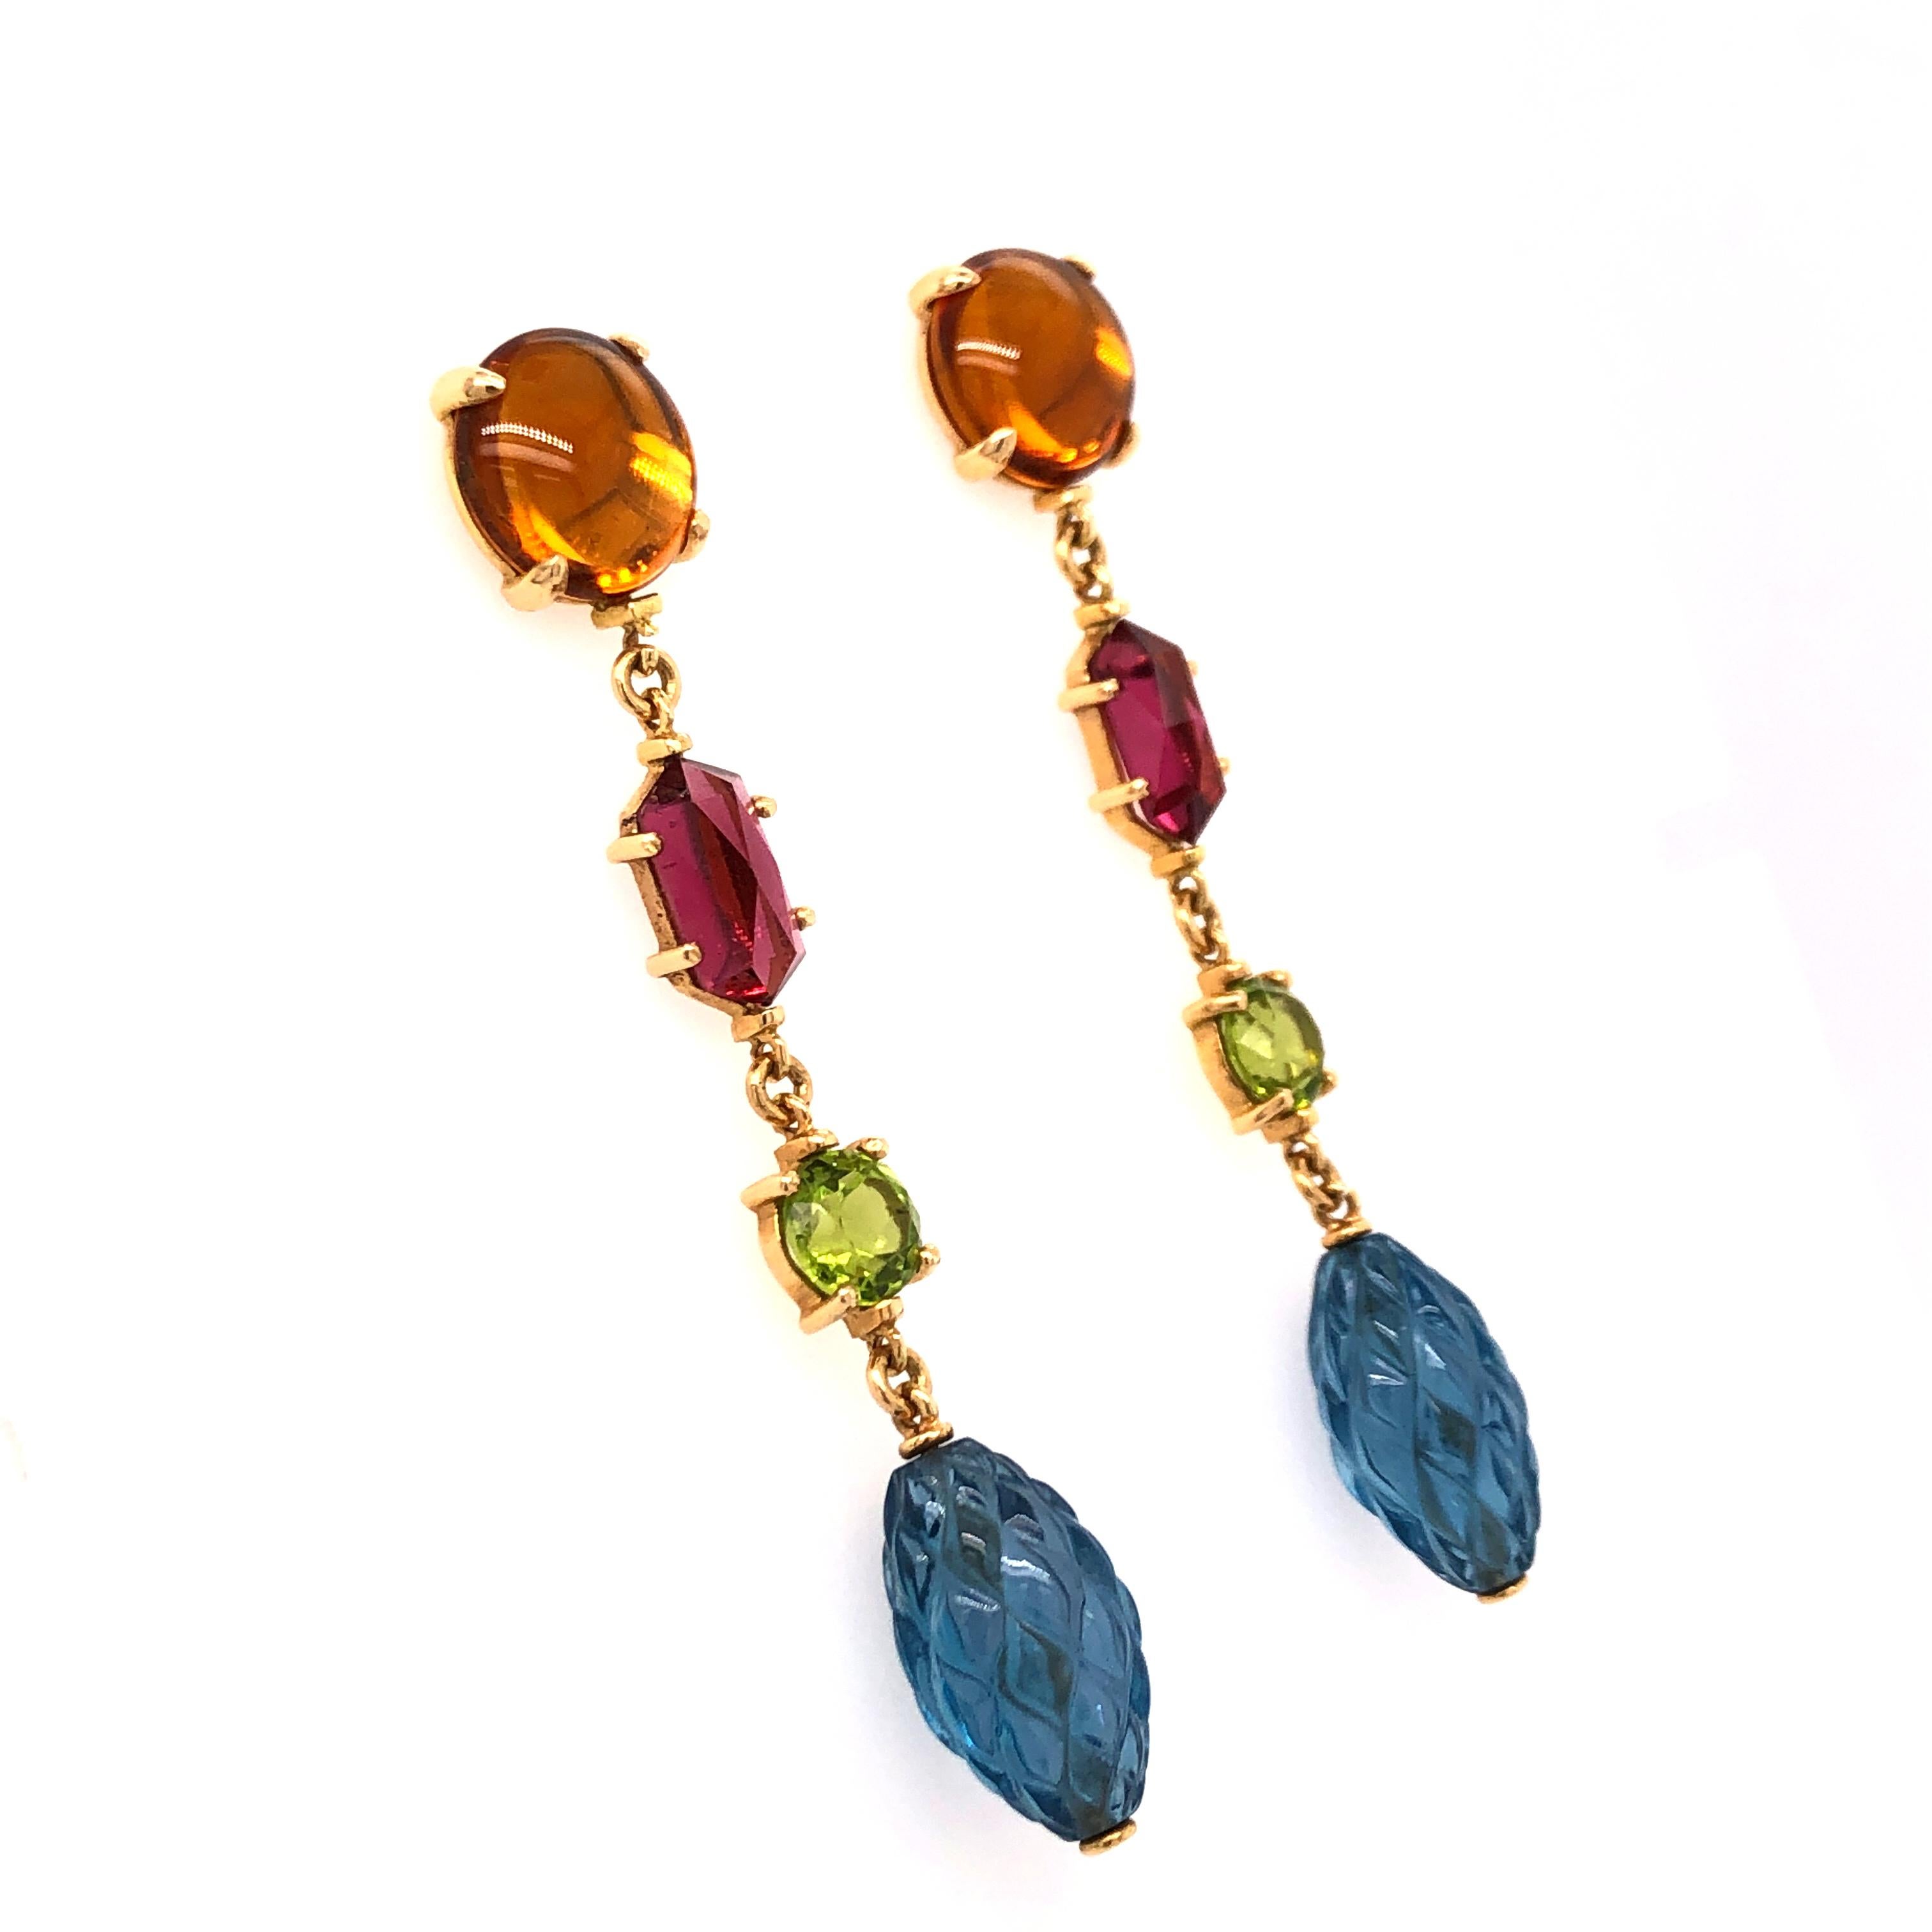 Straight from the house of Vaid Roma these Citrine, Tourmaline, Peridot, and Topaz earrings bring a playful splash of color to your outfit. The stones are set in 18 karat gold.

